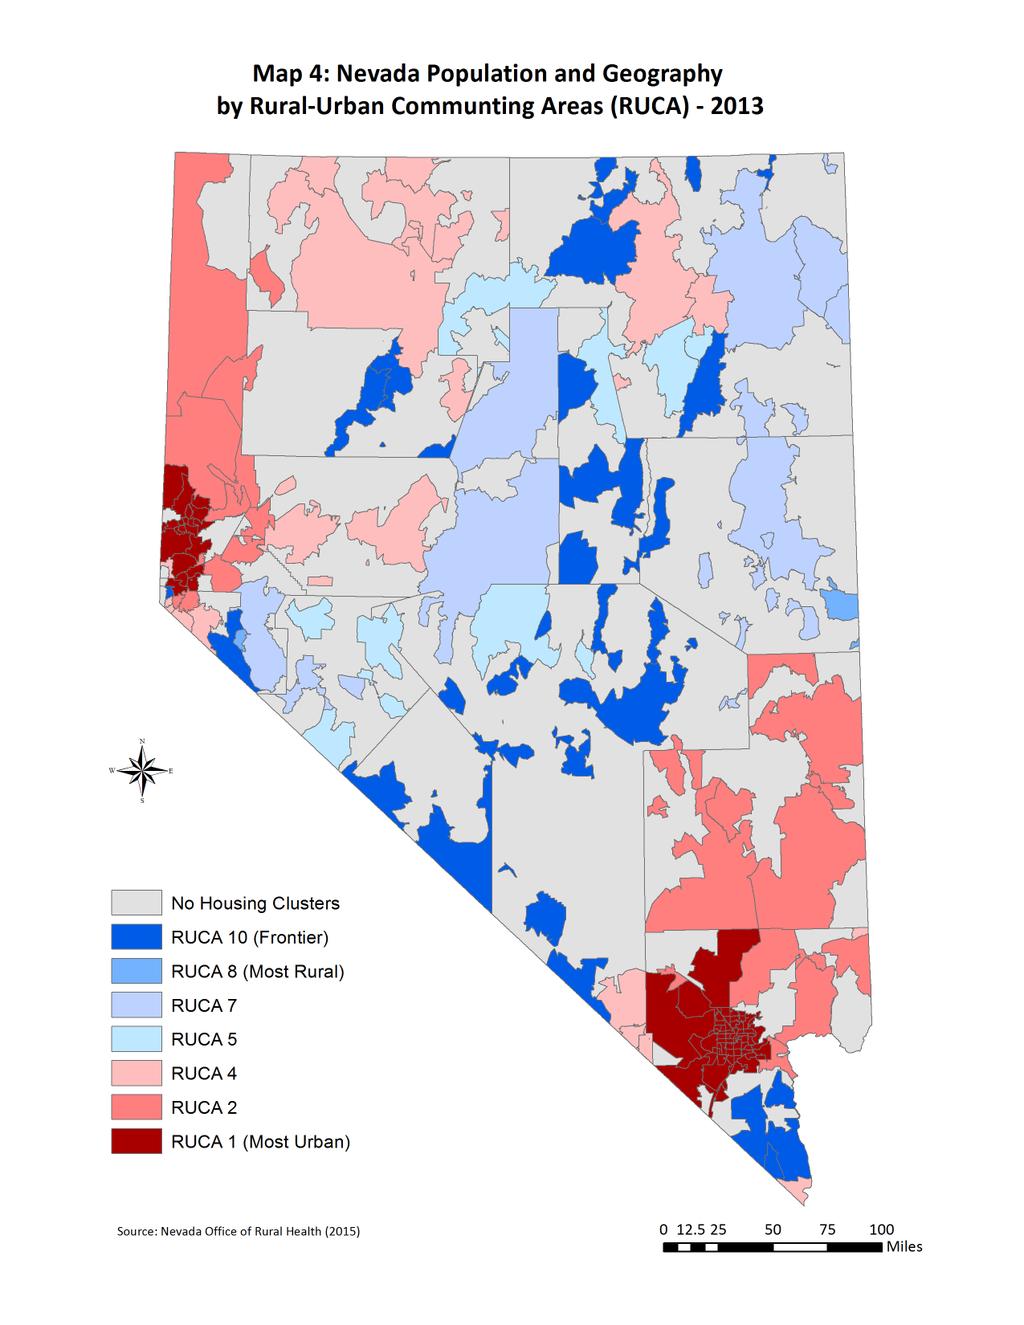 Nevada Population City, County, and Region RUCA codes Rural-urban commuting areas A more specific population classification tool Considerable variation Urban counties have substantial rural/frontier